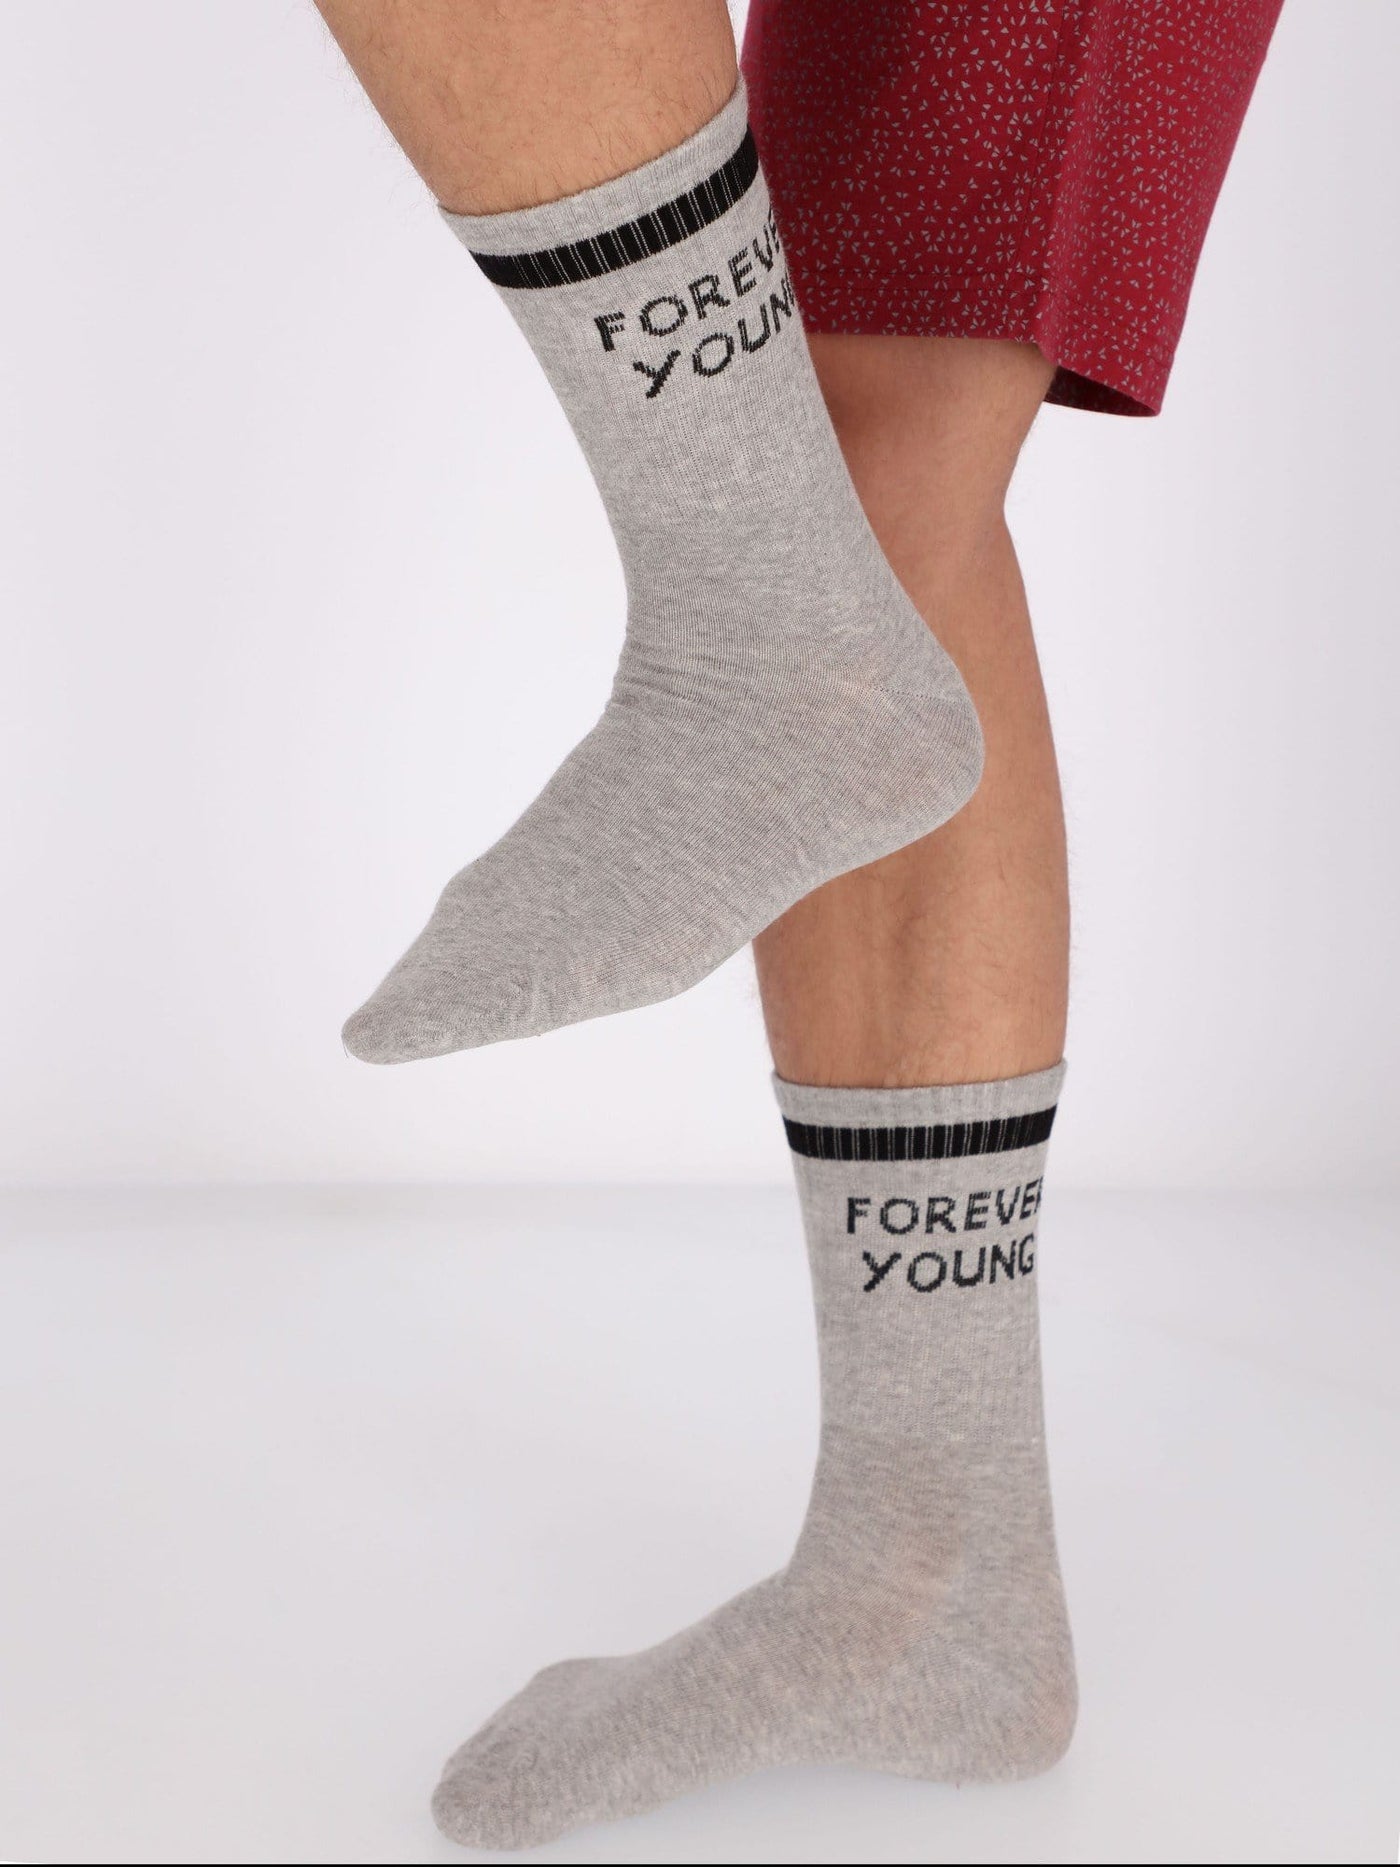 OR Other Accessories grey chine / Os 2 Pairs Forever Young Mid Calf Length Socks